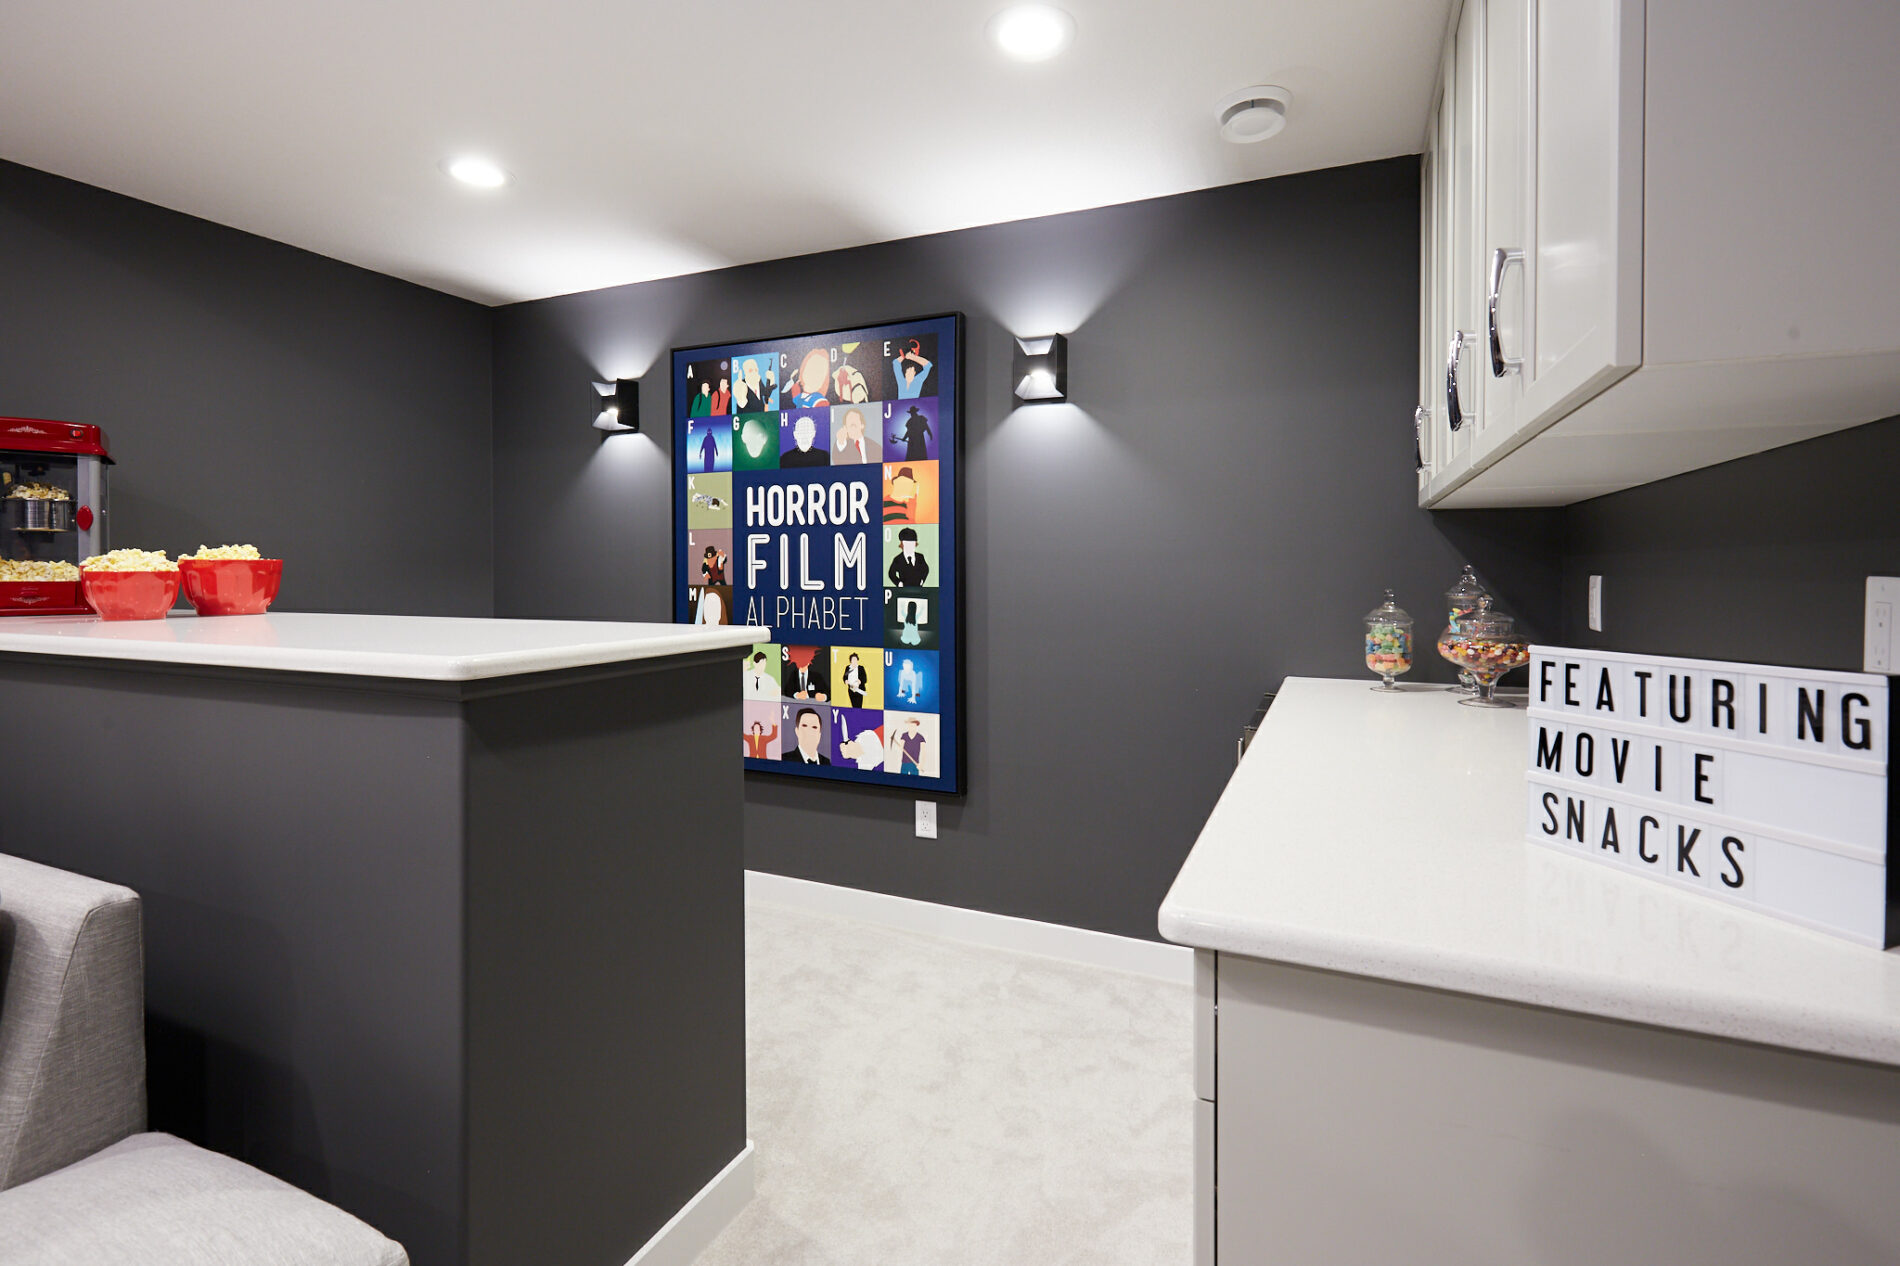 Theatre room in basement with dark grey wall, light cabinetry and a large colourful movie themed piece of art